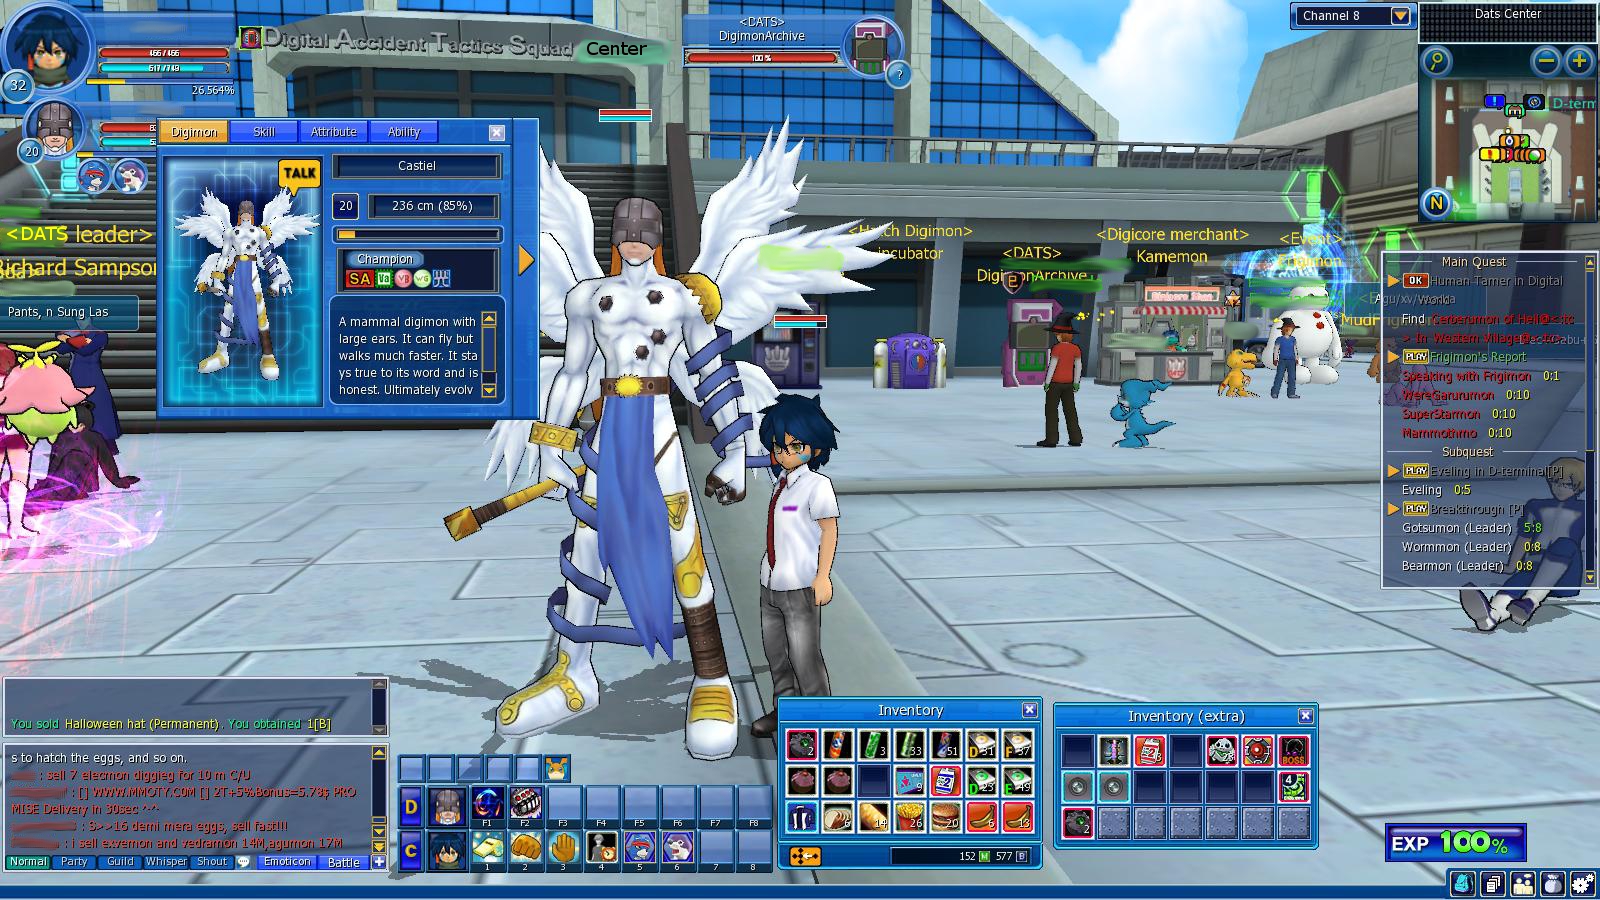 September 23, 2014 Patch - Digimon Masters Online Wiki - DMO Wiki